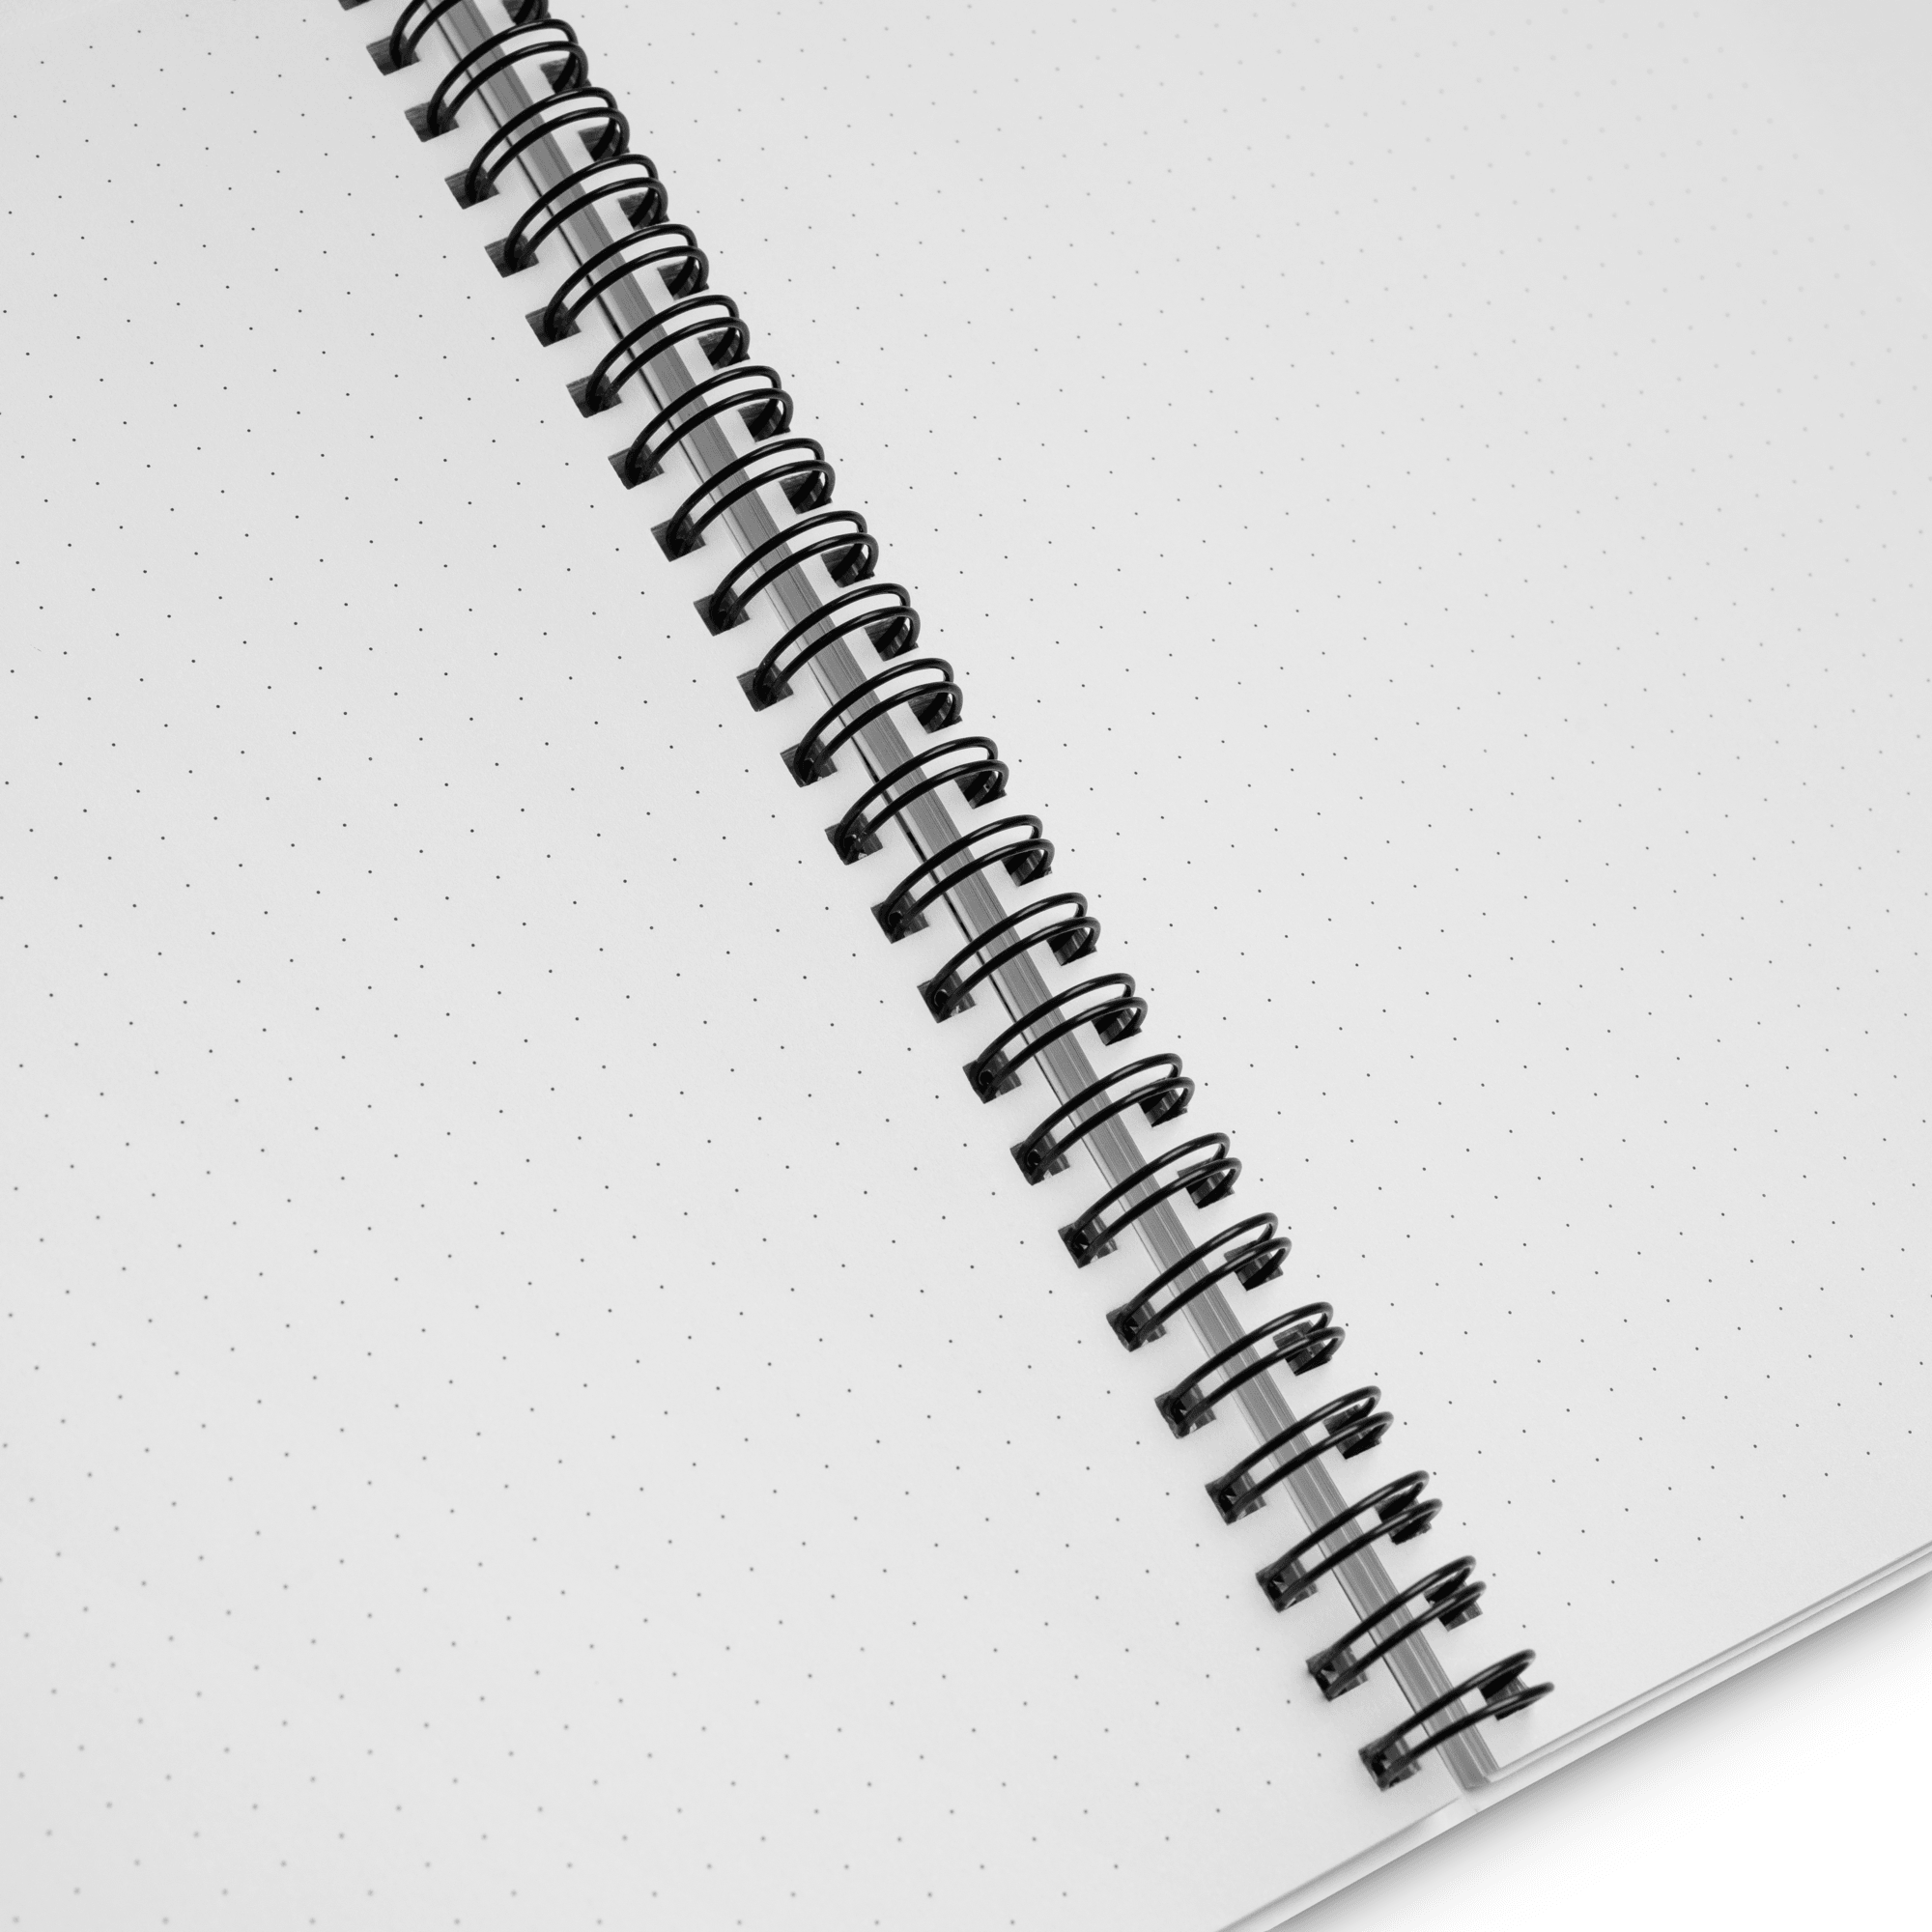 Notebook - With every word